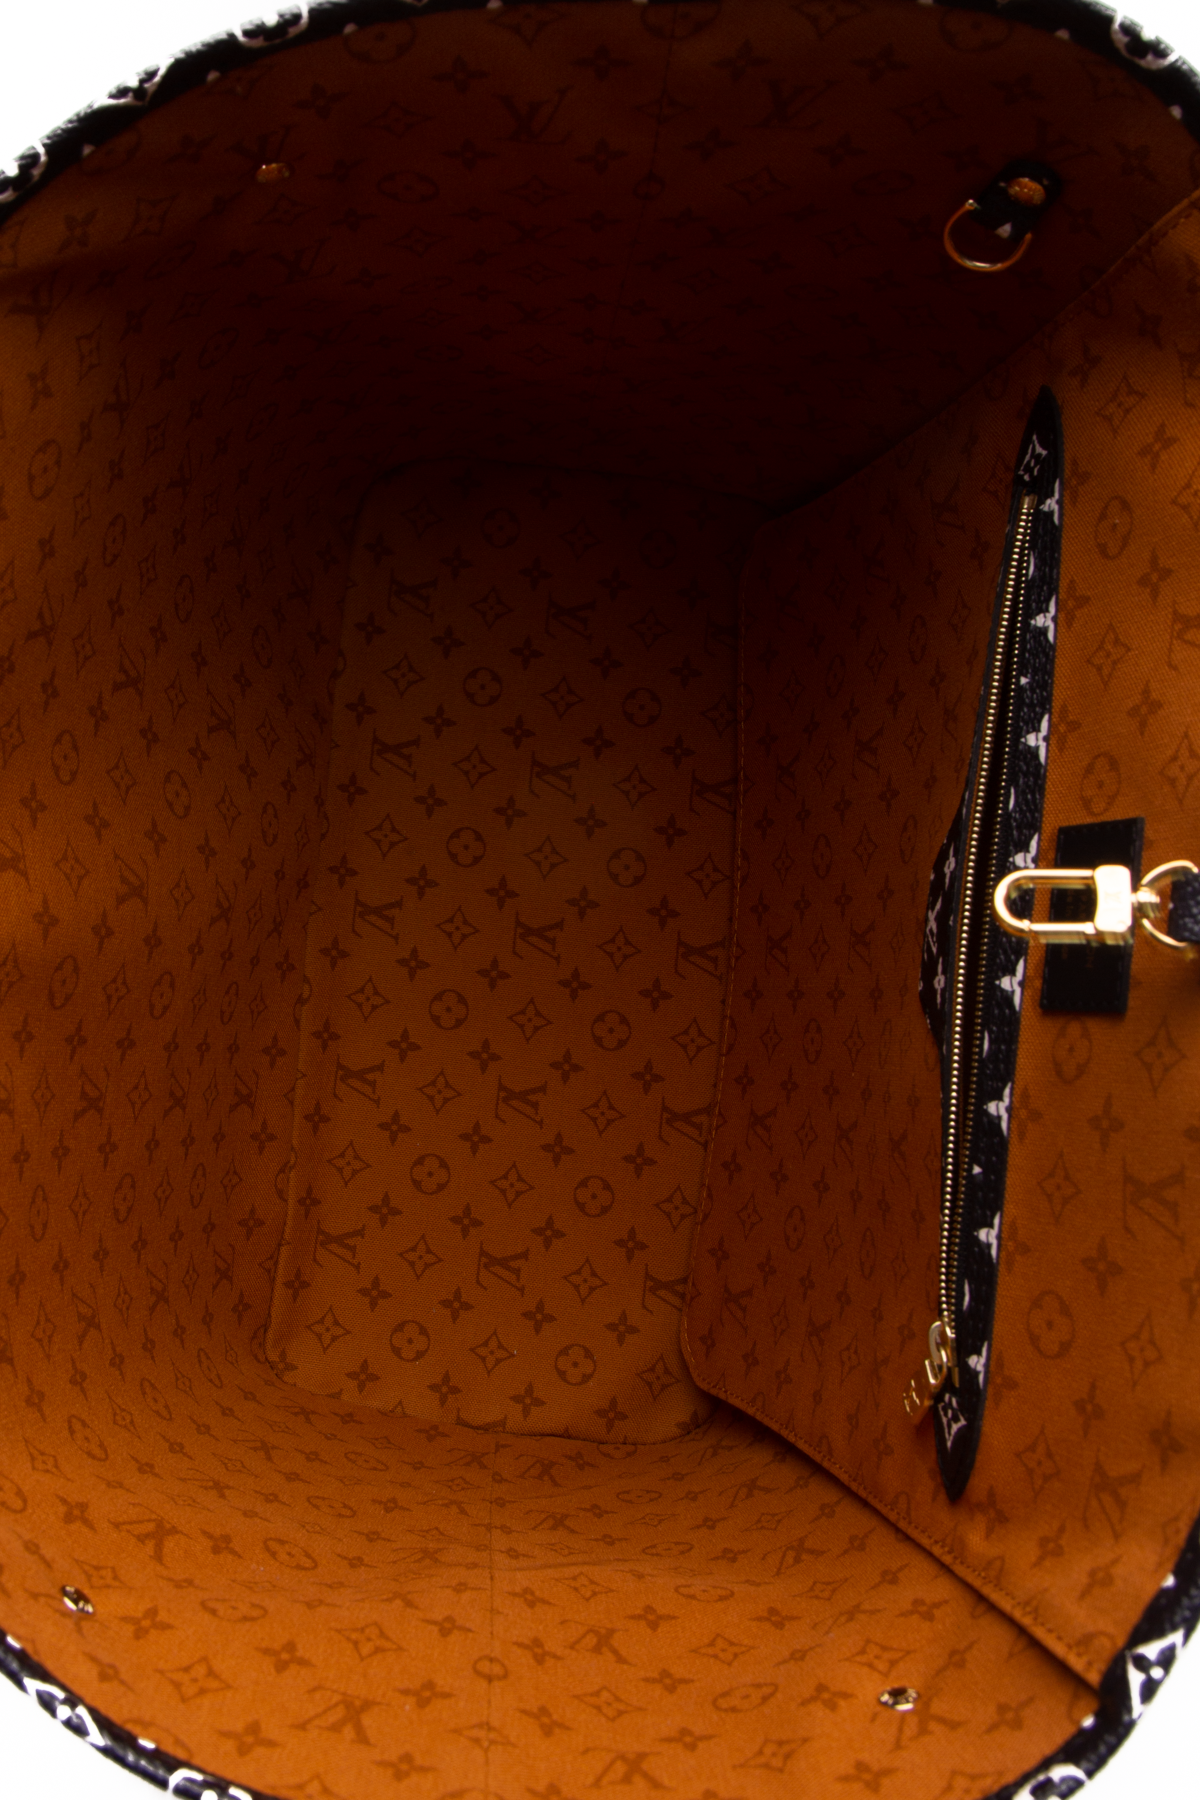 Louis Vuitton Neverfull Tote Bags - Couture USA